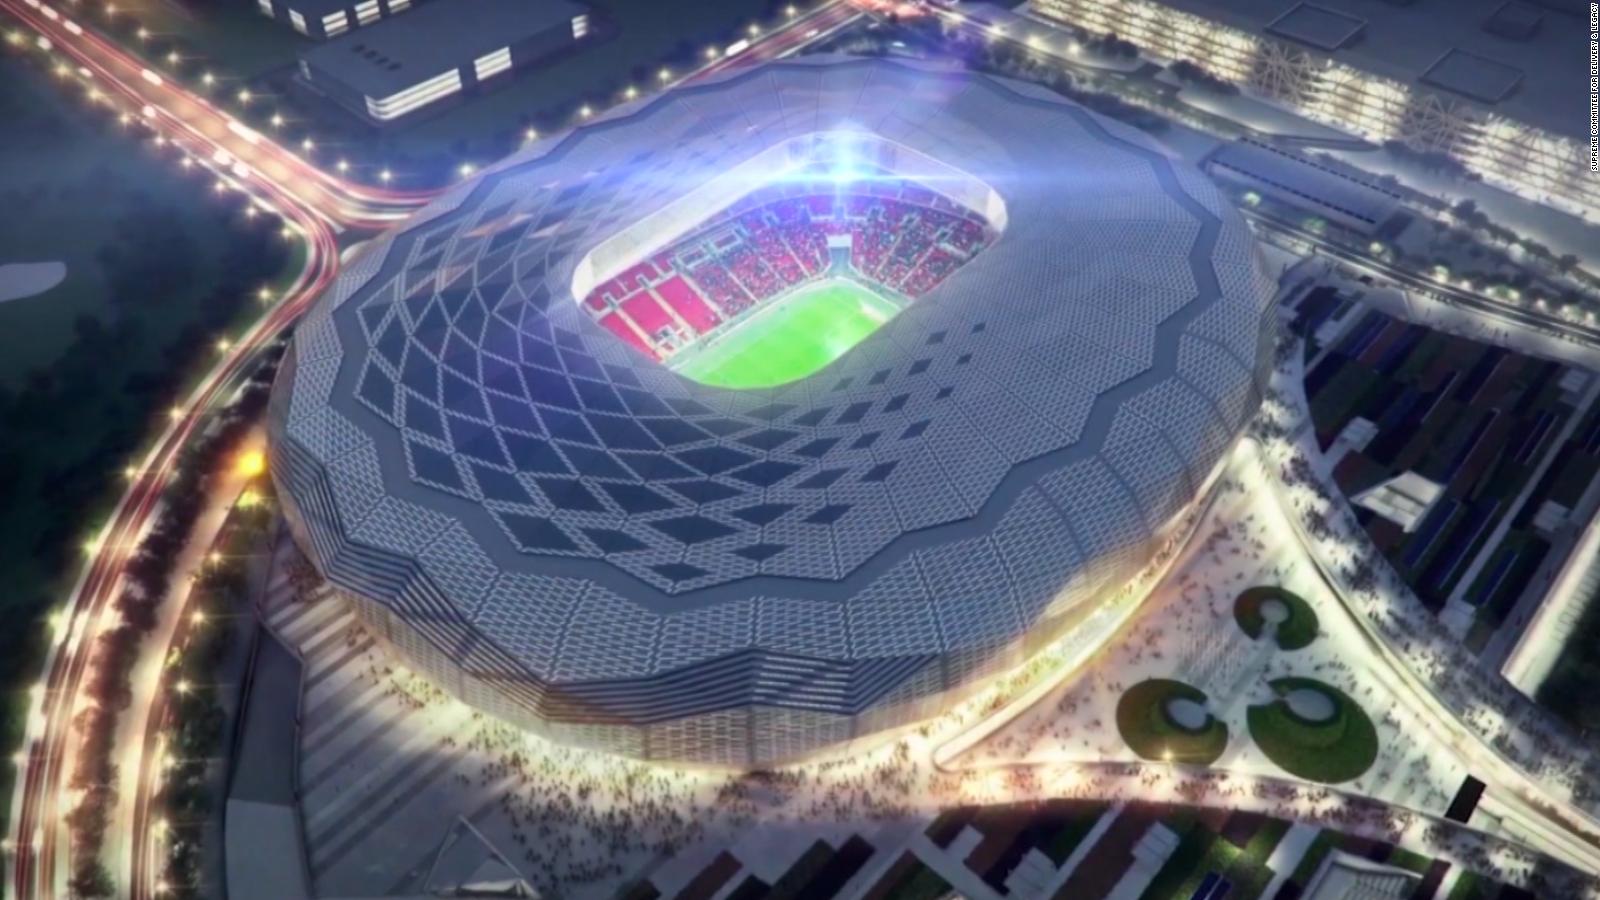 Pin by Snip on Wallpaper  Qatar world cup stadiums, World cup